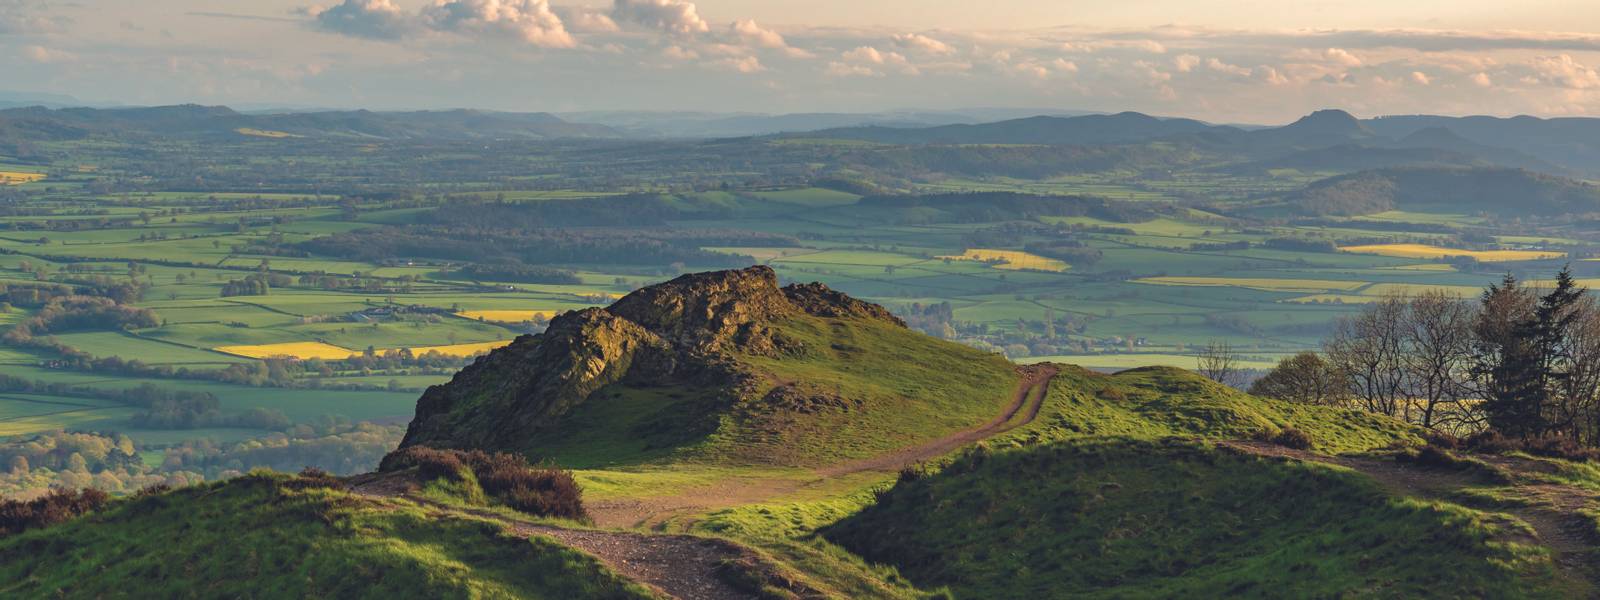 View from the Wrekin, near Telford, Shropshire, England, UK - looking south over Little Hill towards Eyton